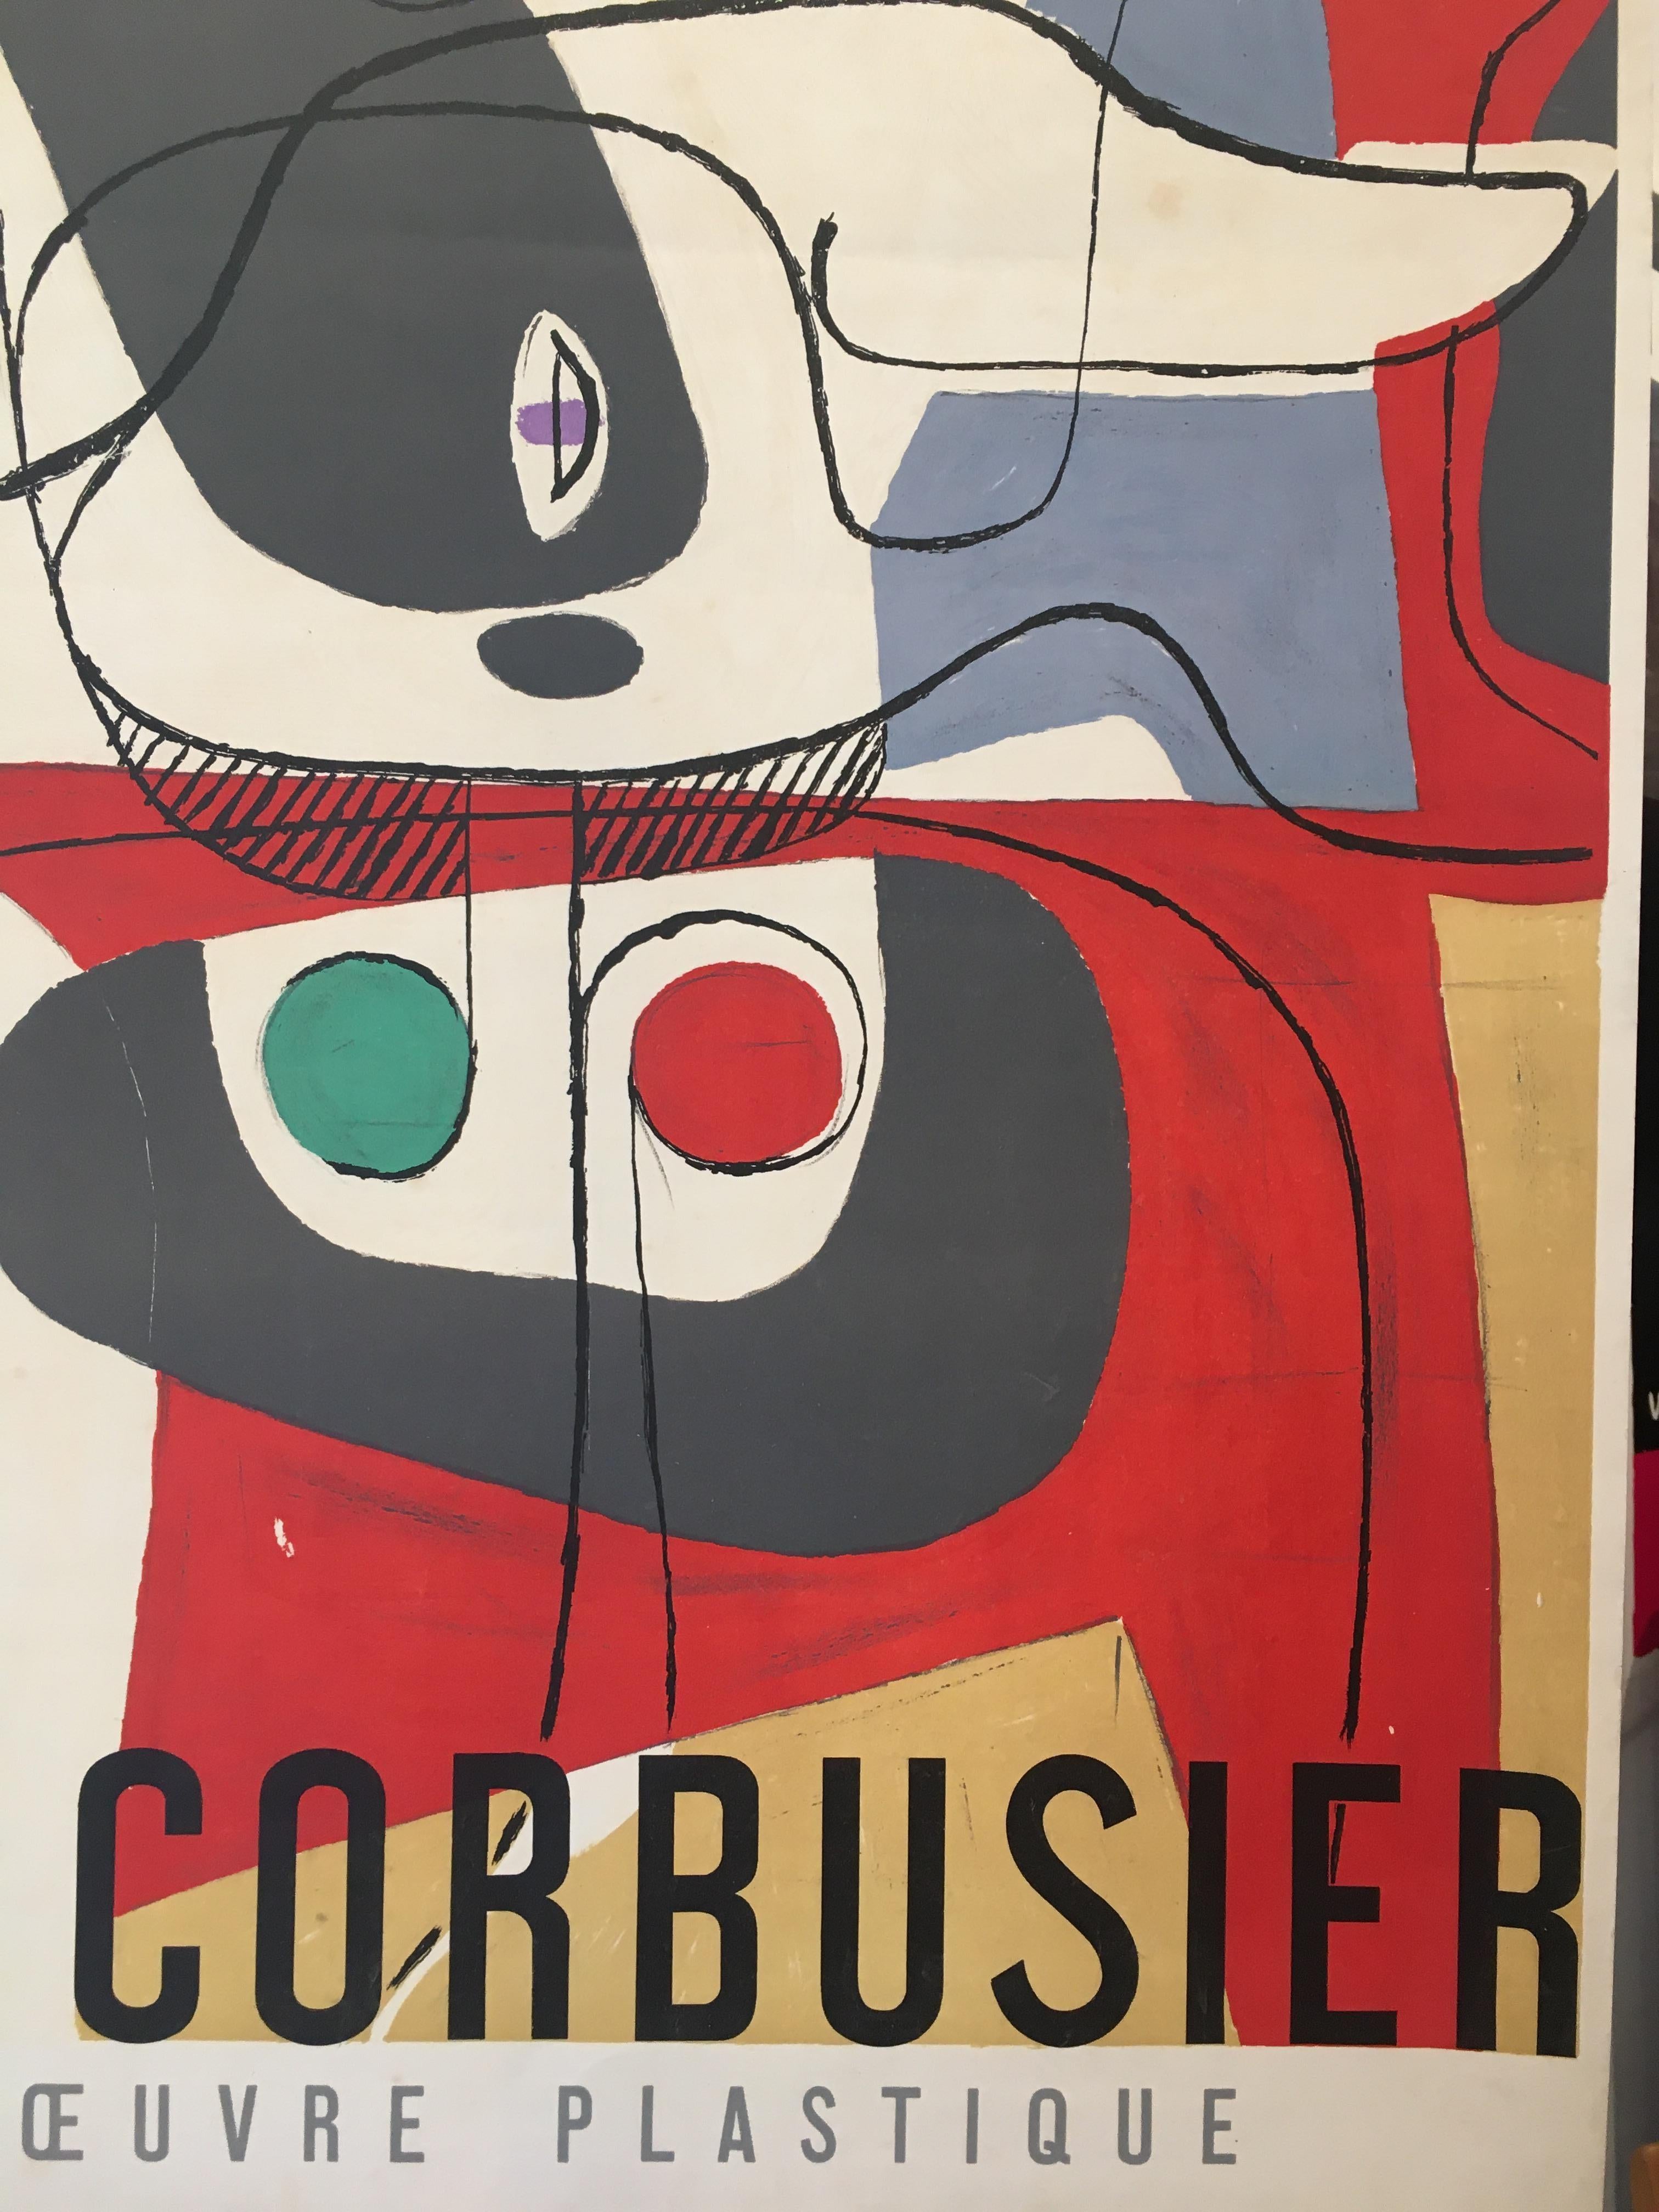 Mid-20th Century Original Exhibition Poster, Le Corbusier, 'Musee National D’art Moderne', 1953